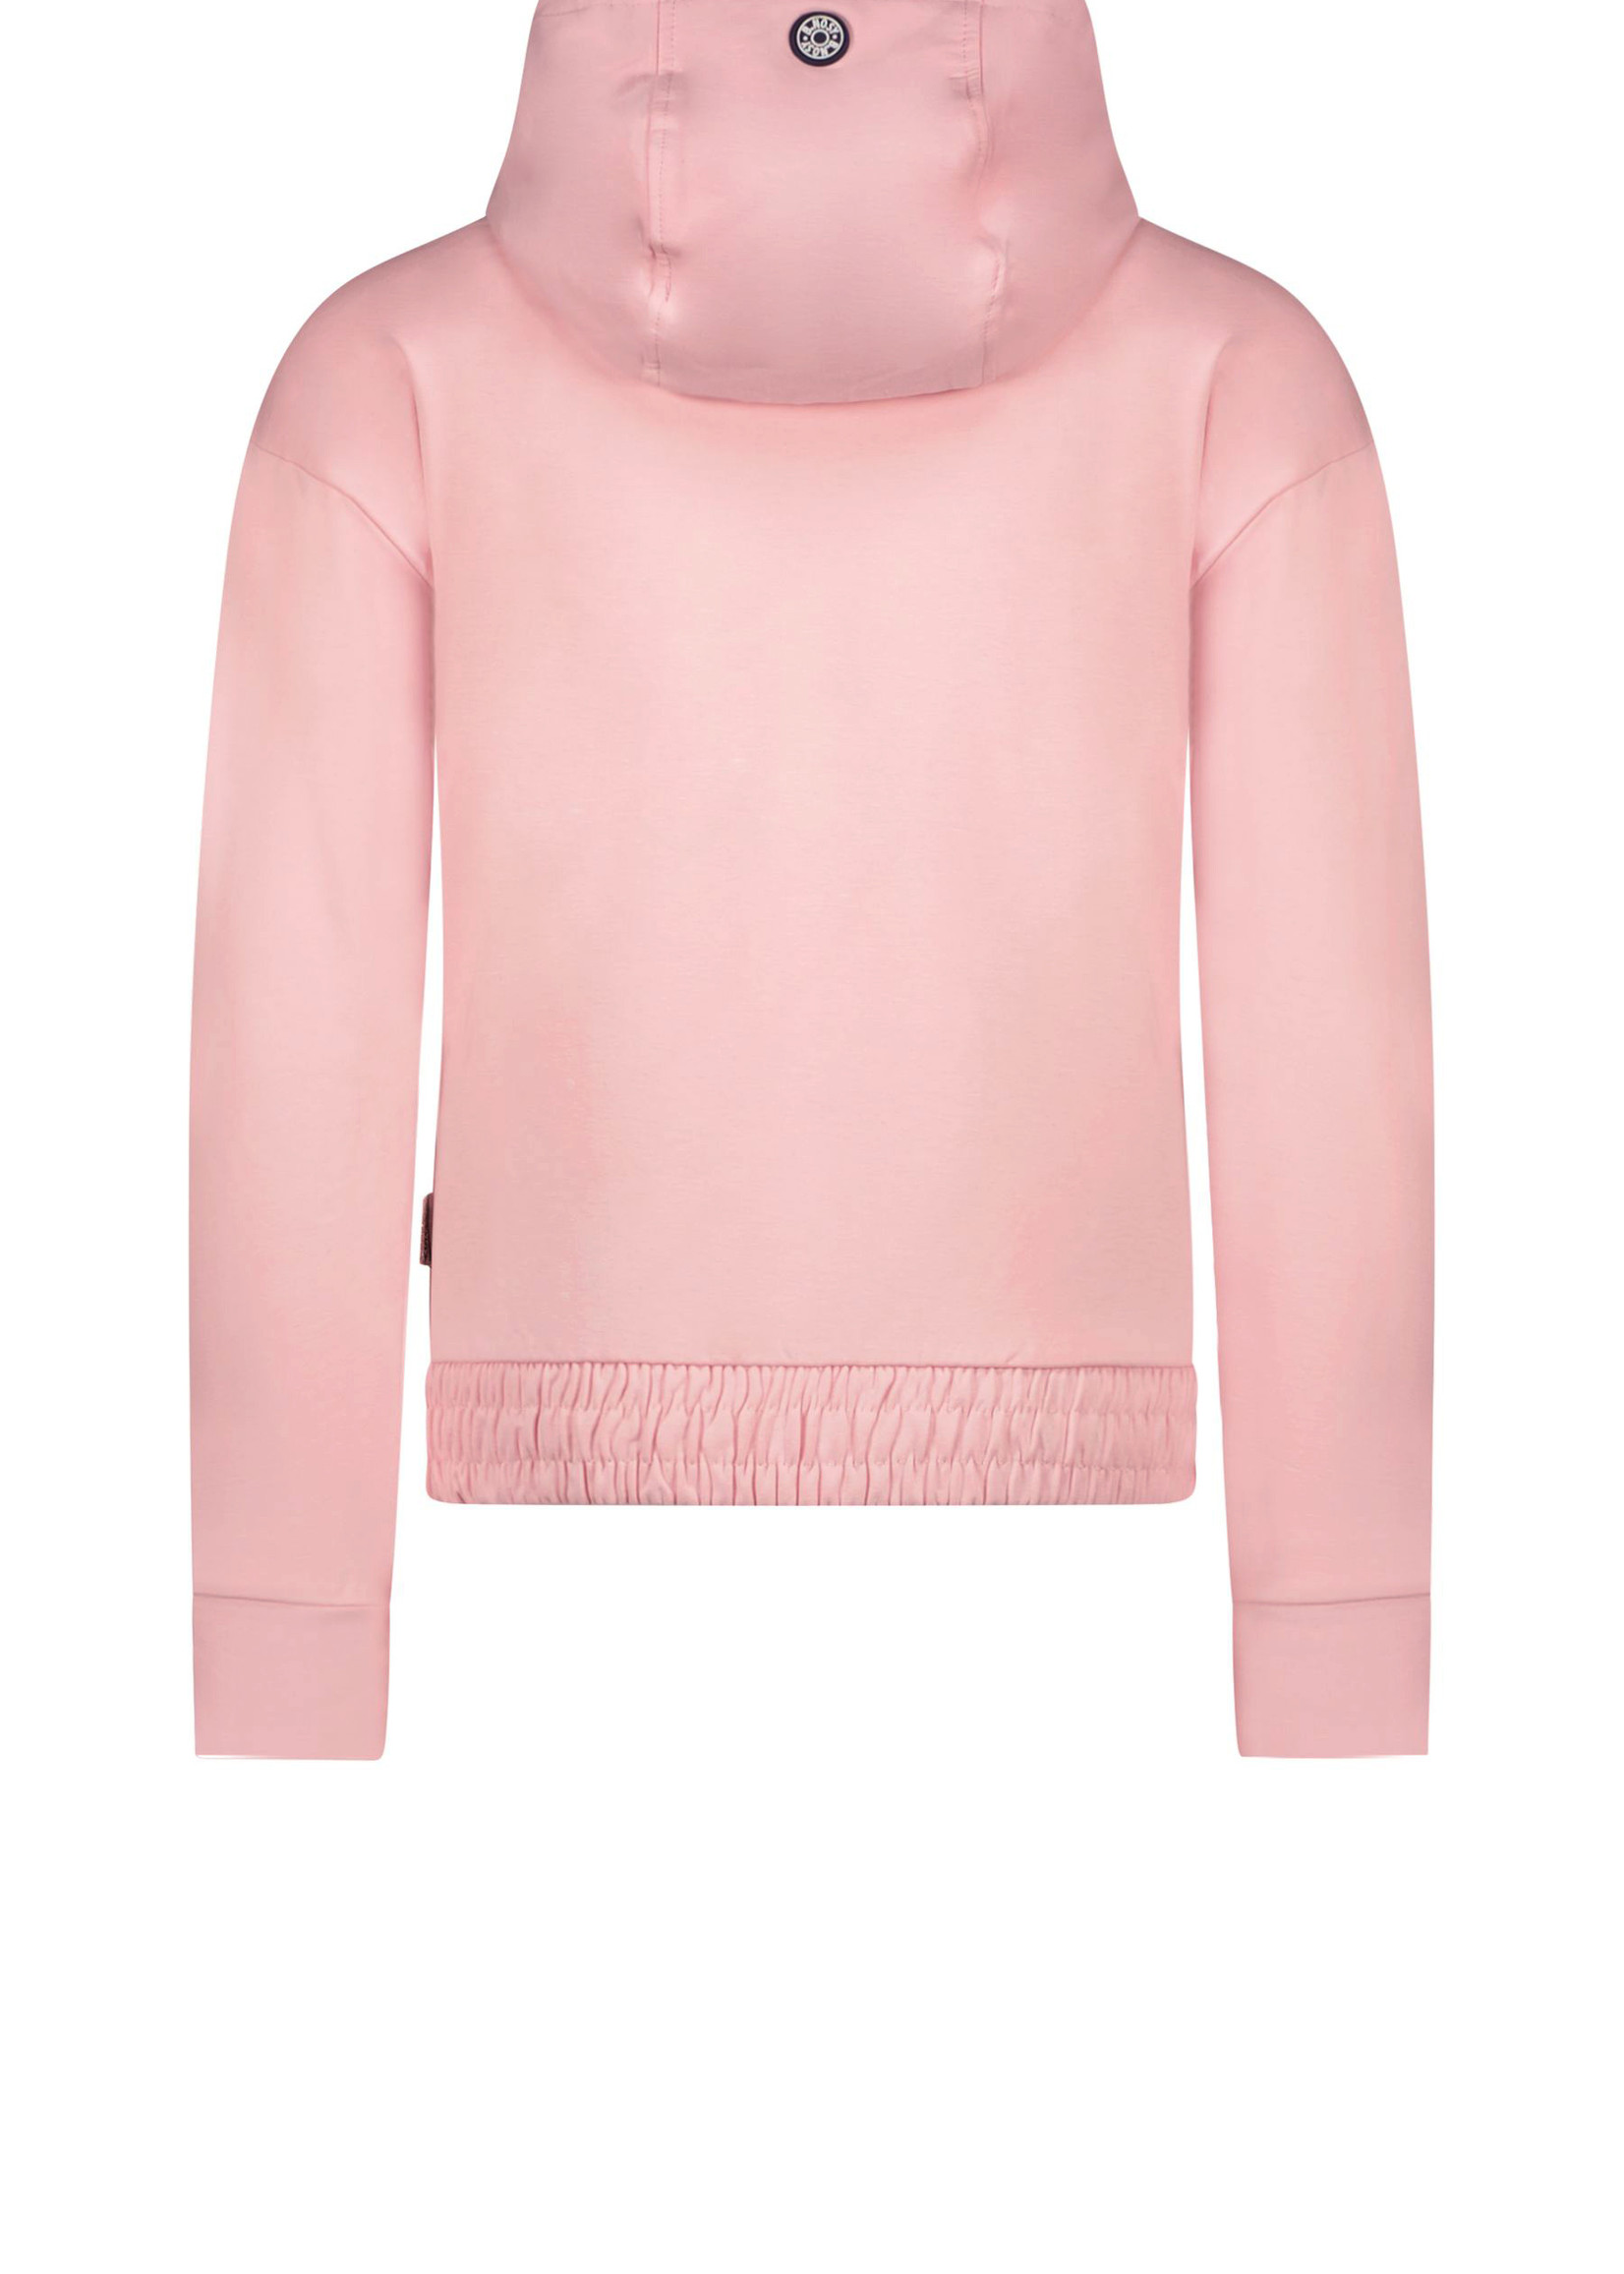 B-Nosy Girls hooded sweater with embroidery on front and sleeve, Coral blush